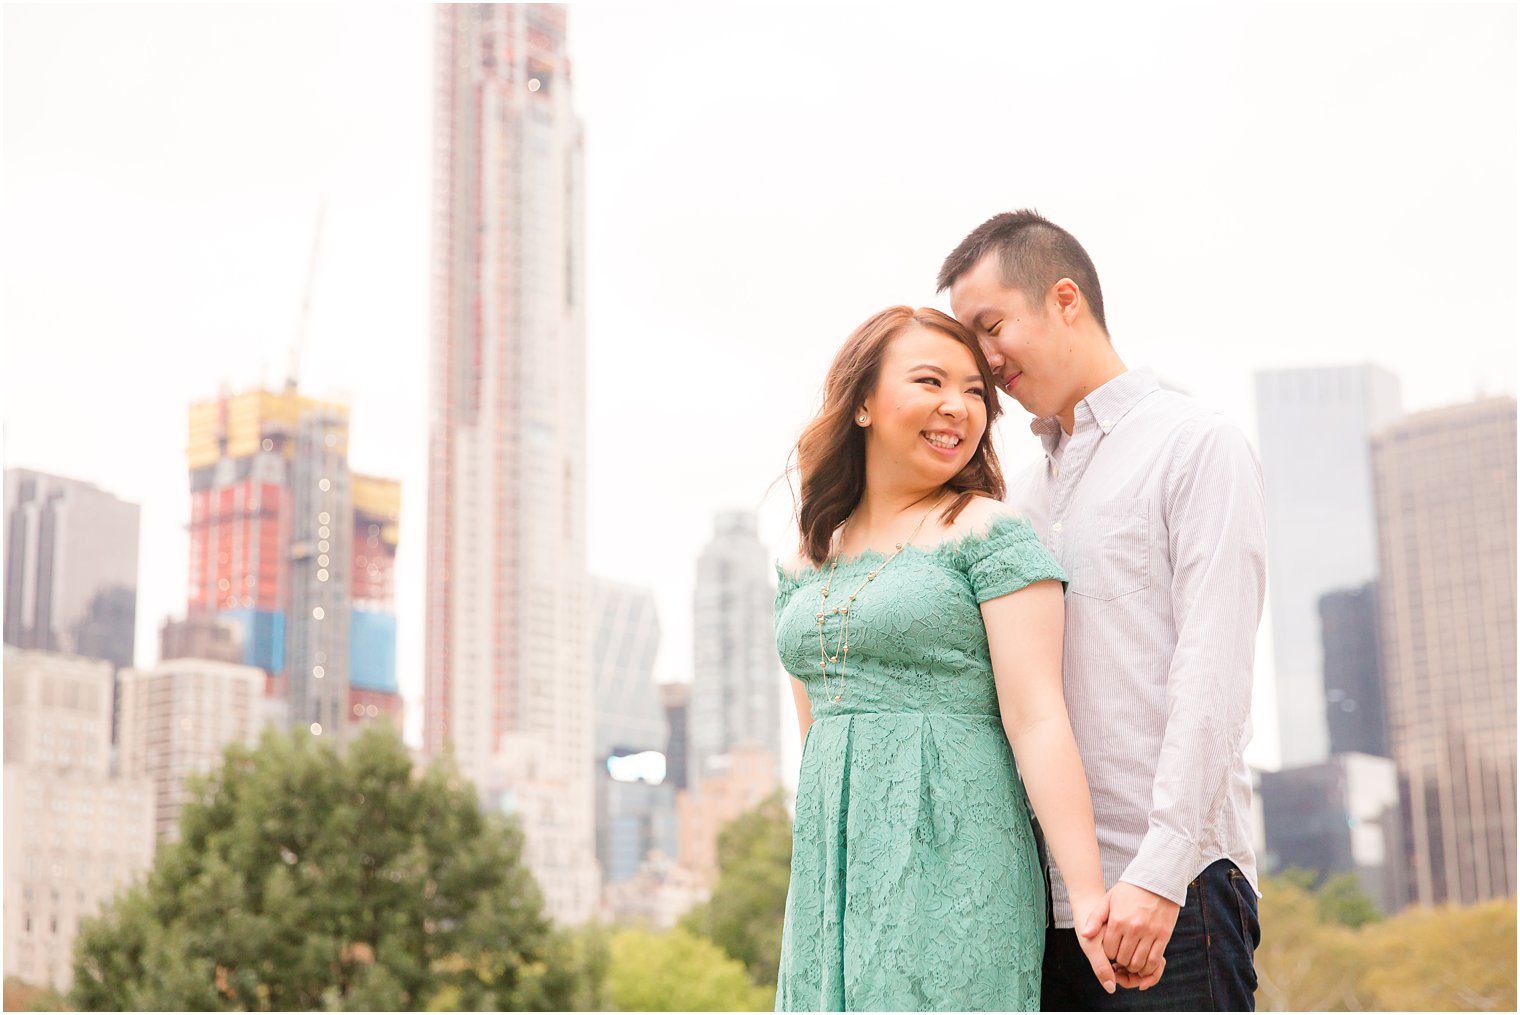 Engagement photo with NYC skyline